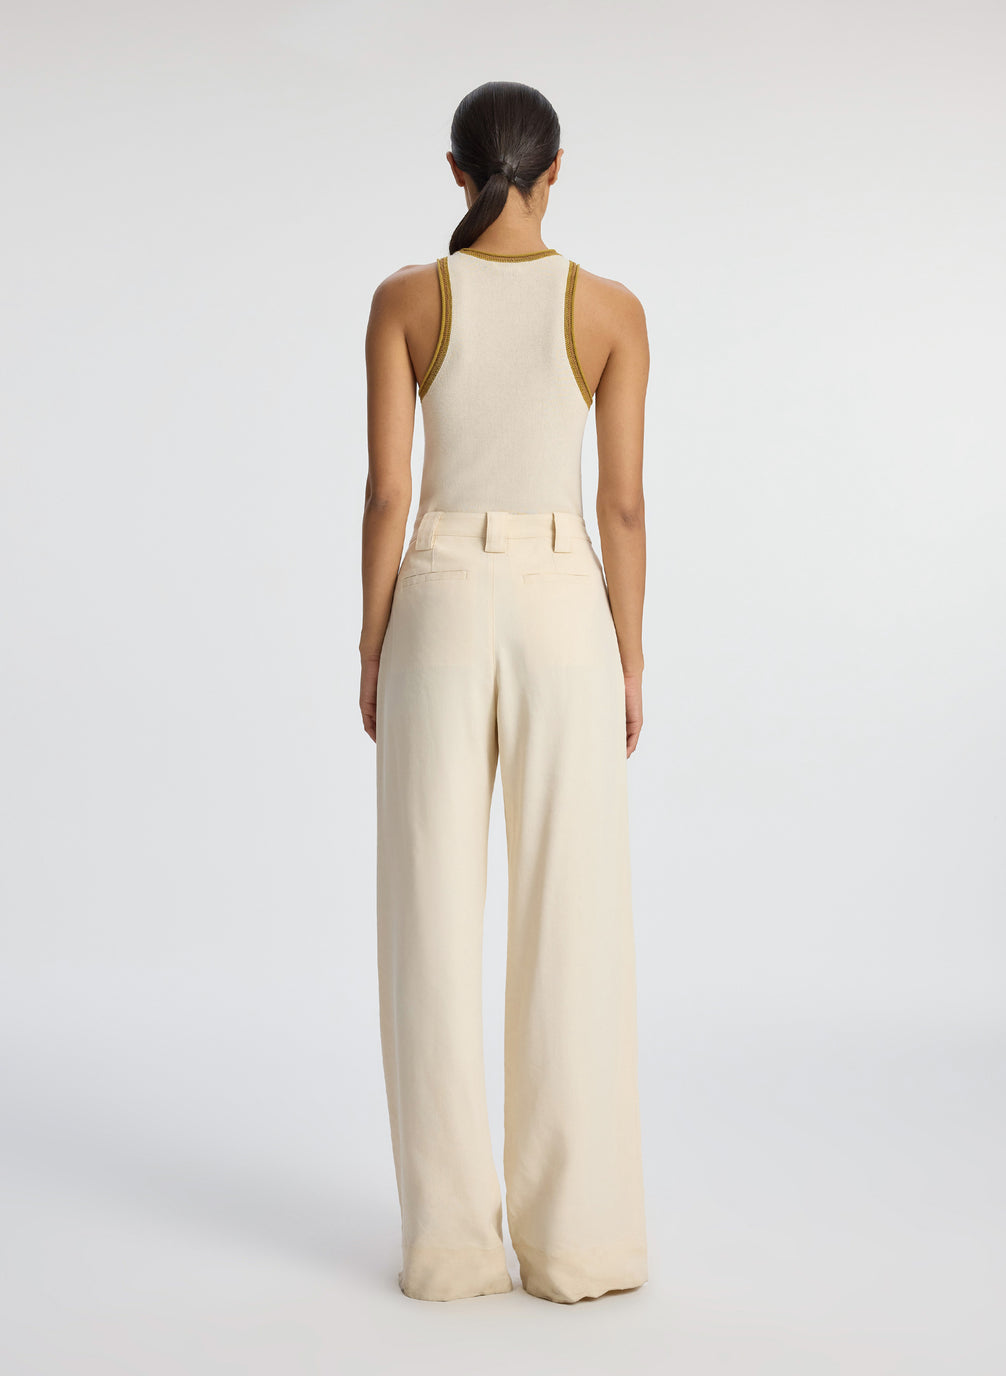 back view of woman wearing cream tank top and beige wide leg pants